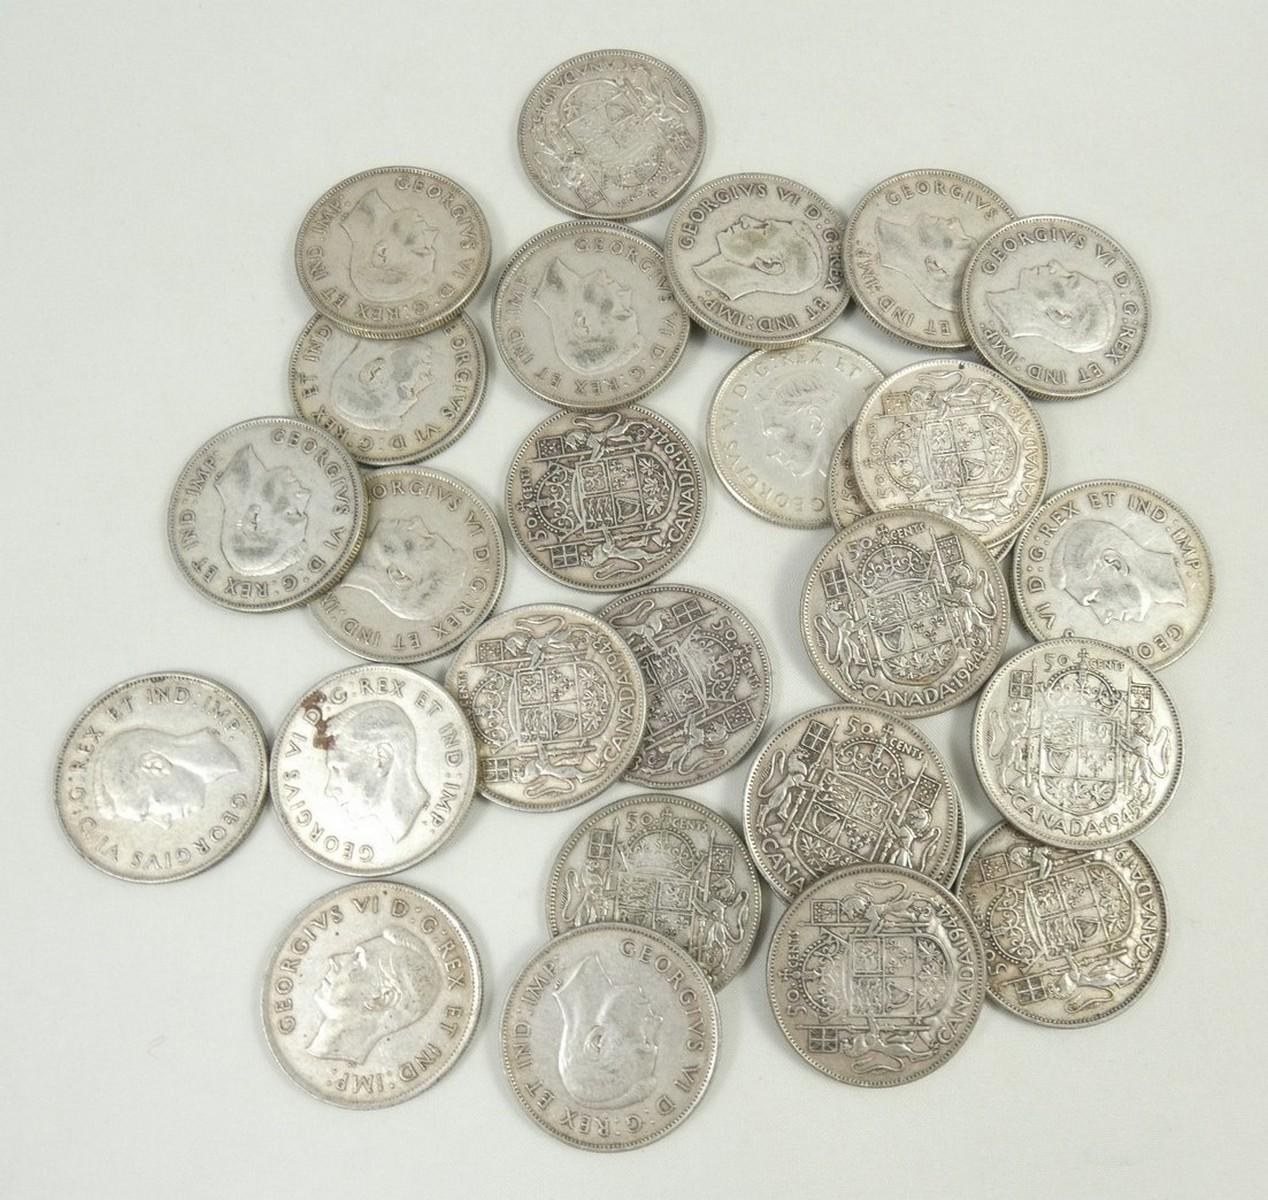 CANADIAN SILVER 50-CENTS